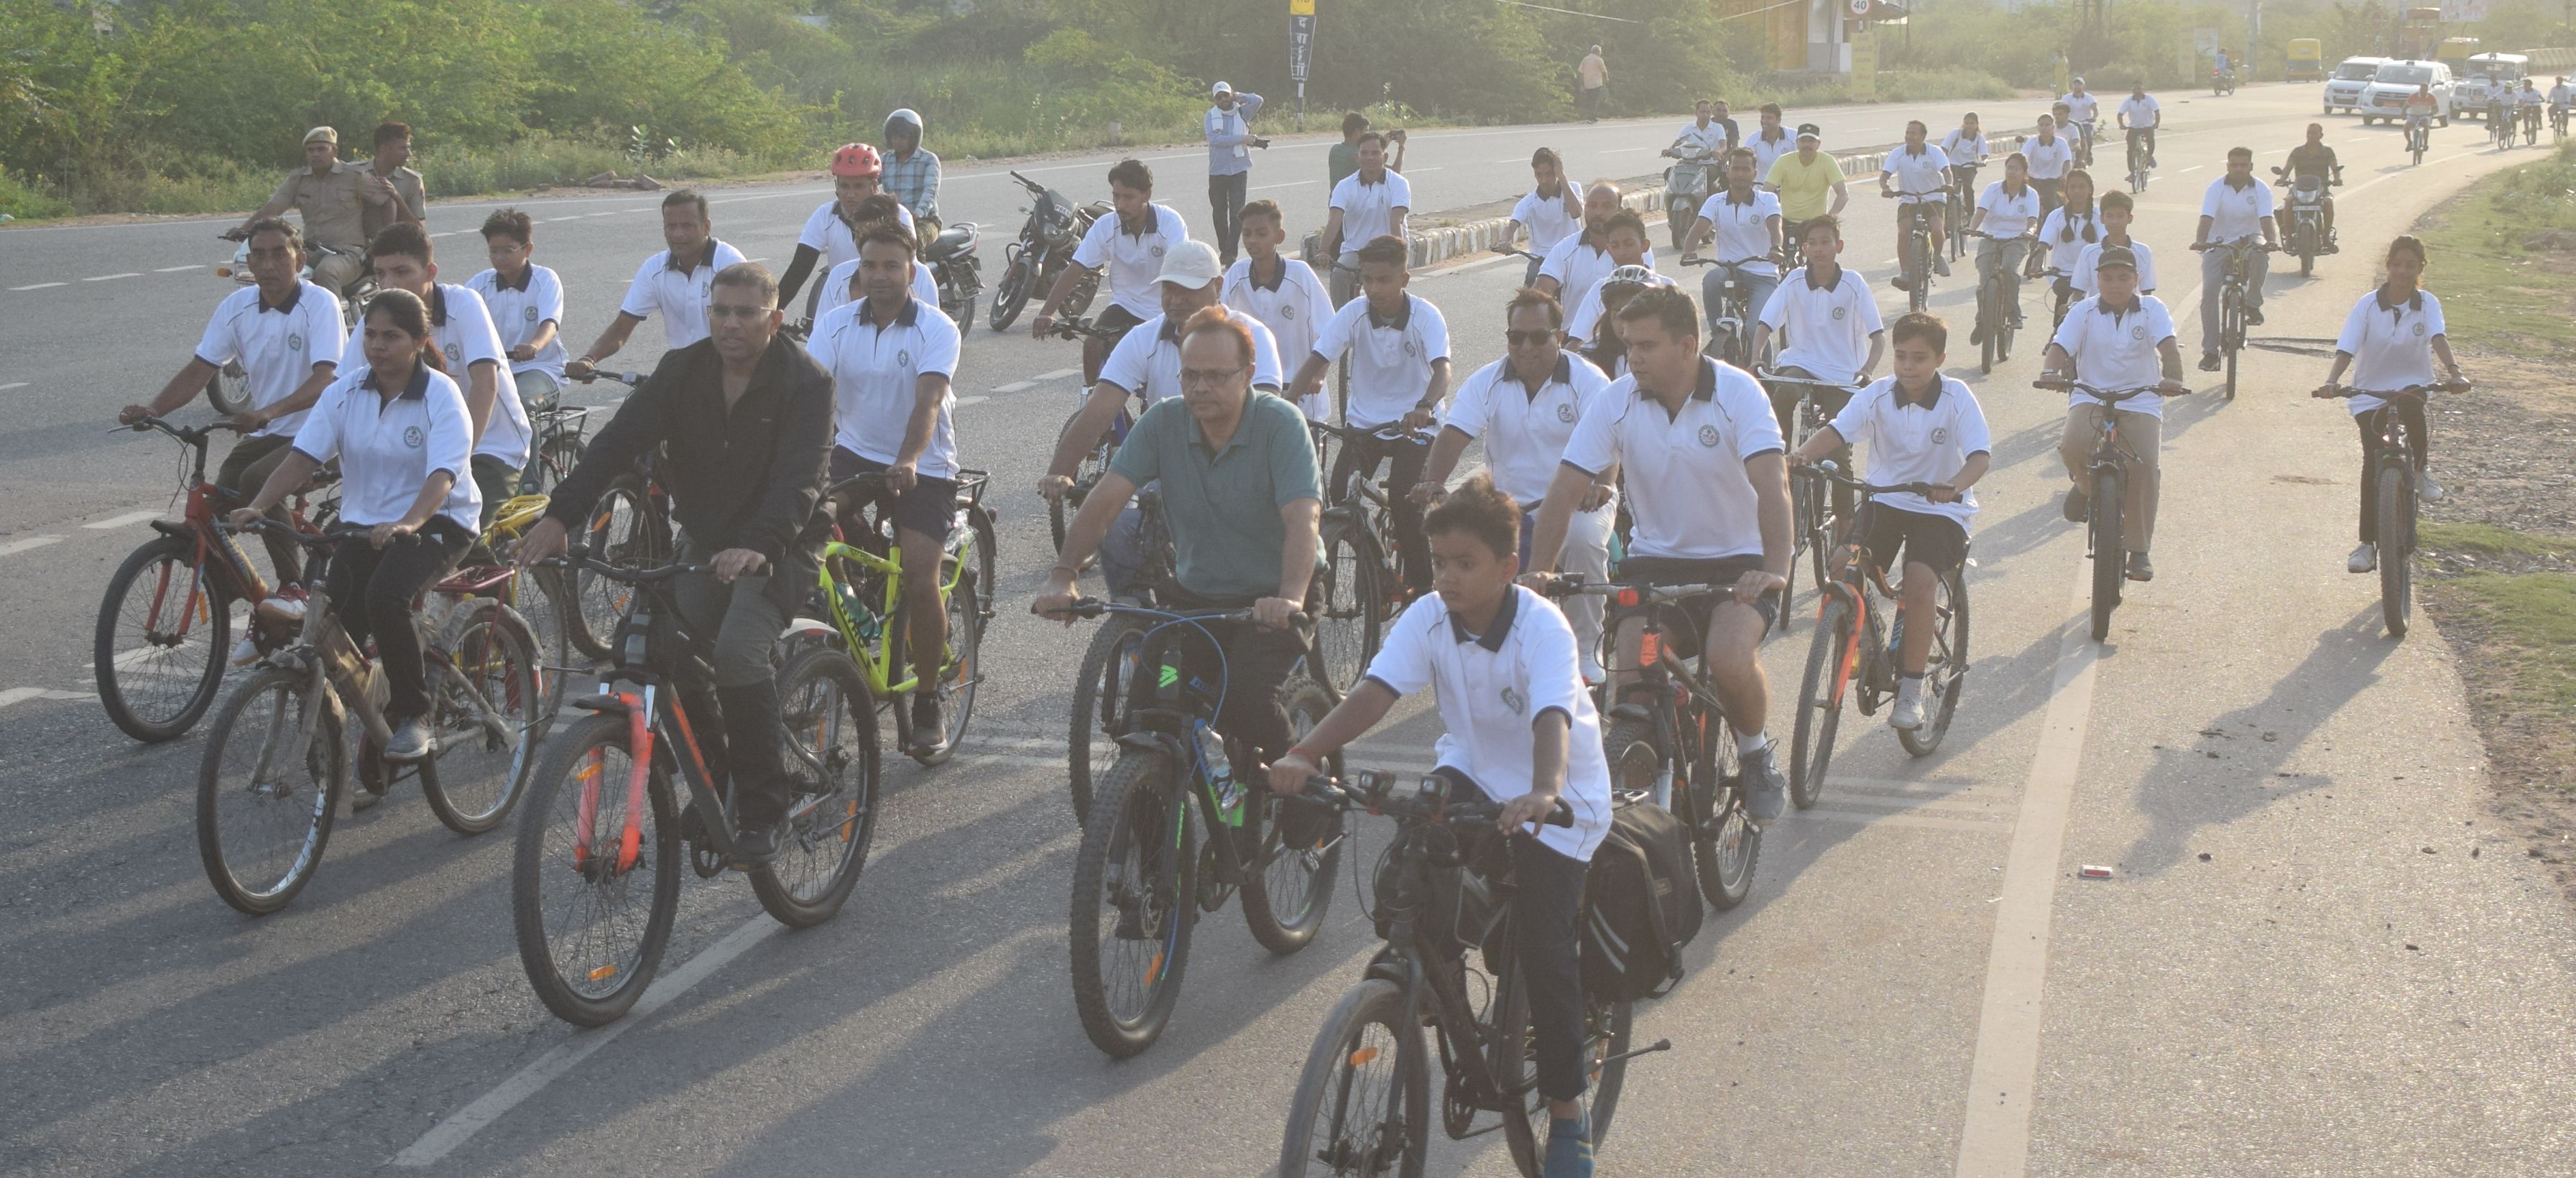 Cycle rally organized by Rajasthan Patrika and Administration on World Environment Day